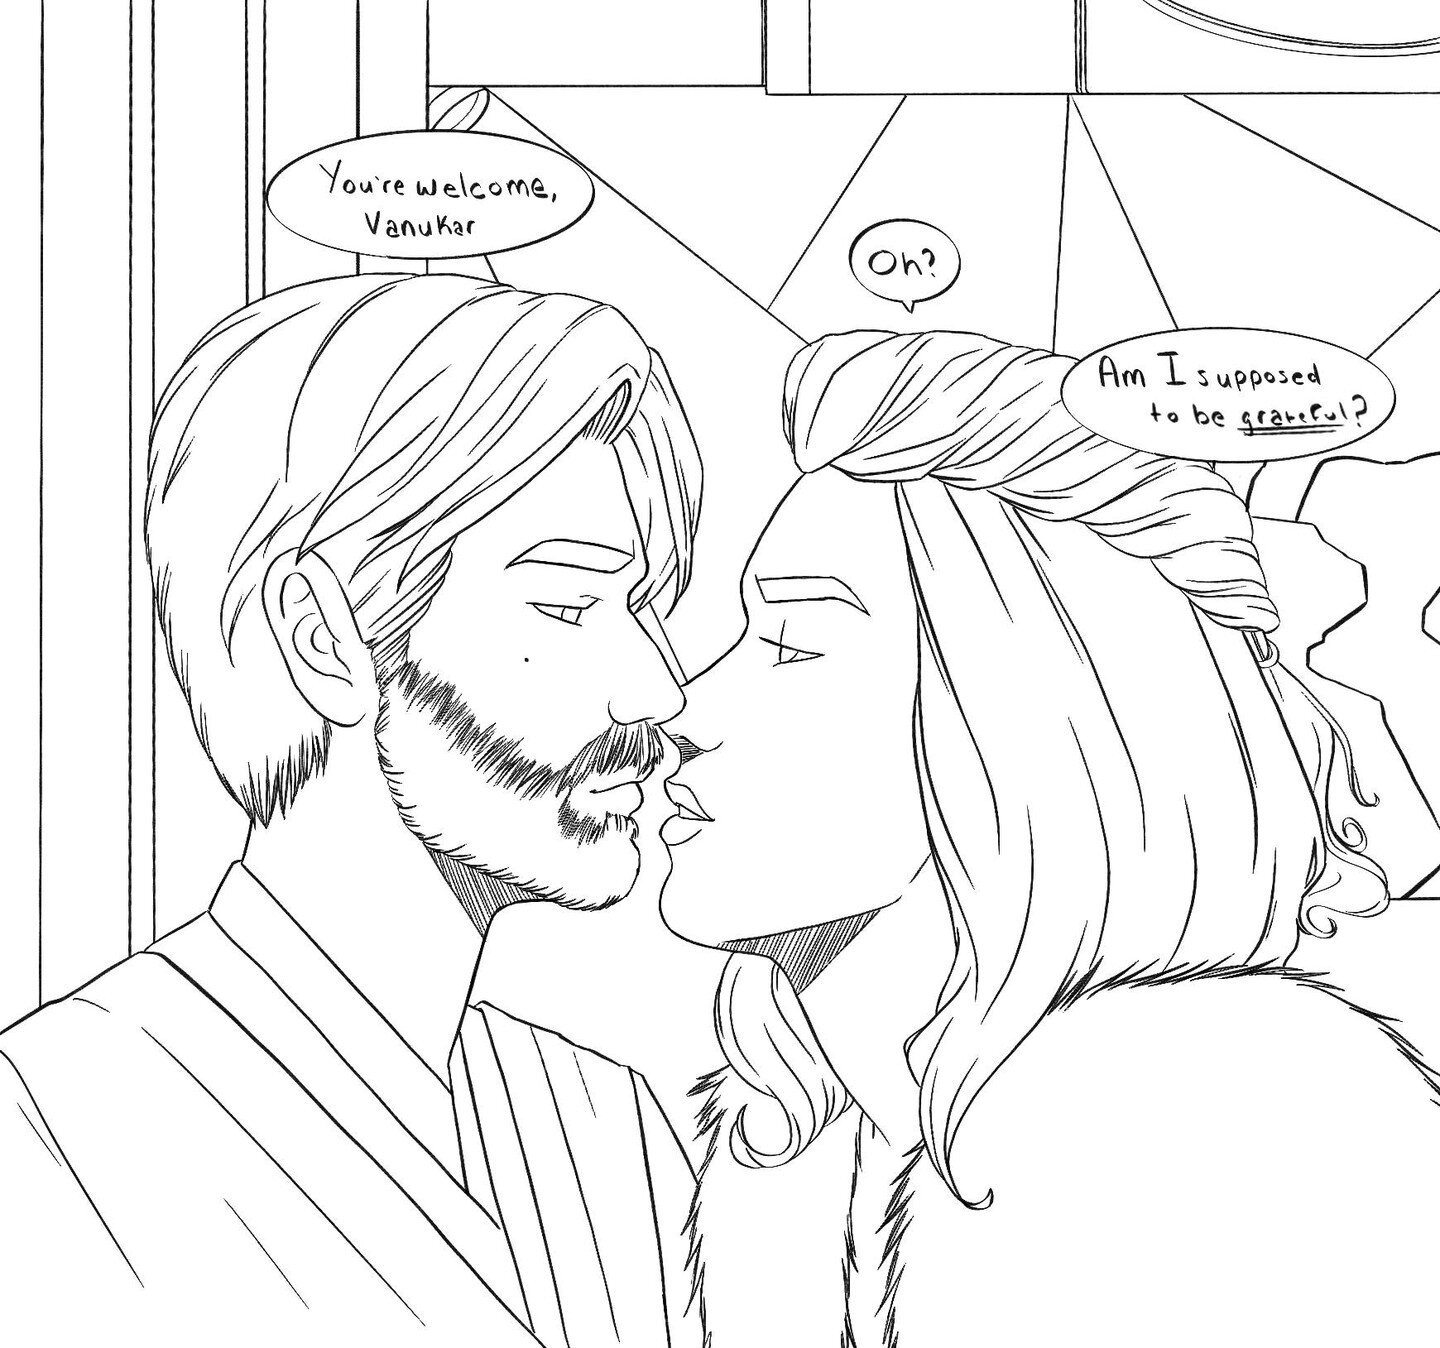 A smol little interaction in three parts. Had fun drawing this while I was out of town. Just silly younger shenanigans with Obi-Wan and Leigh. 
.
.
.
.
#jedioc #jedi #starwars #starwarsoc #obiwankenobi #obiwan #benkenobi #ewanmcgregor #jediromance #a